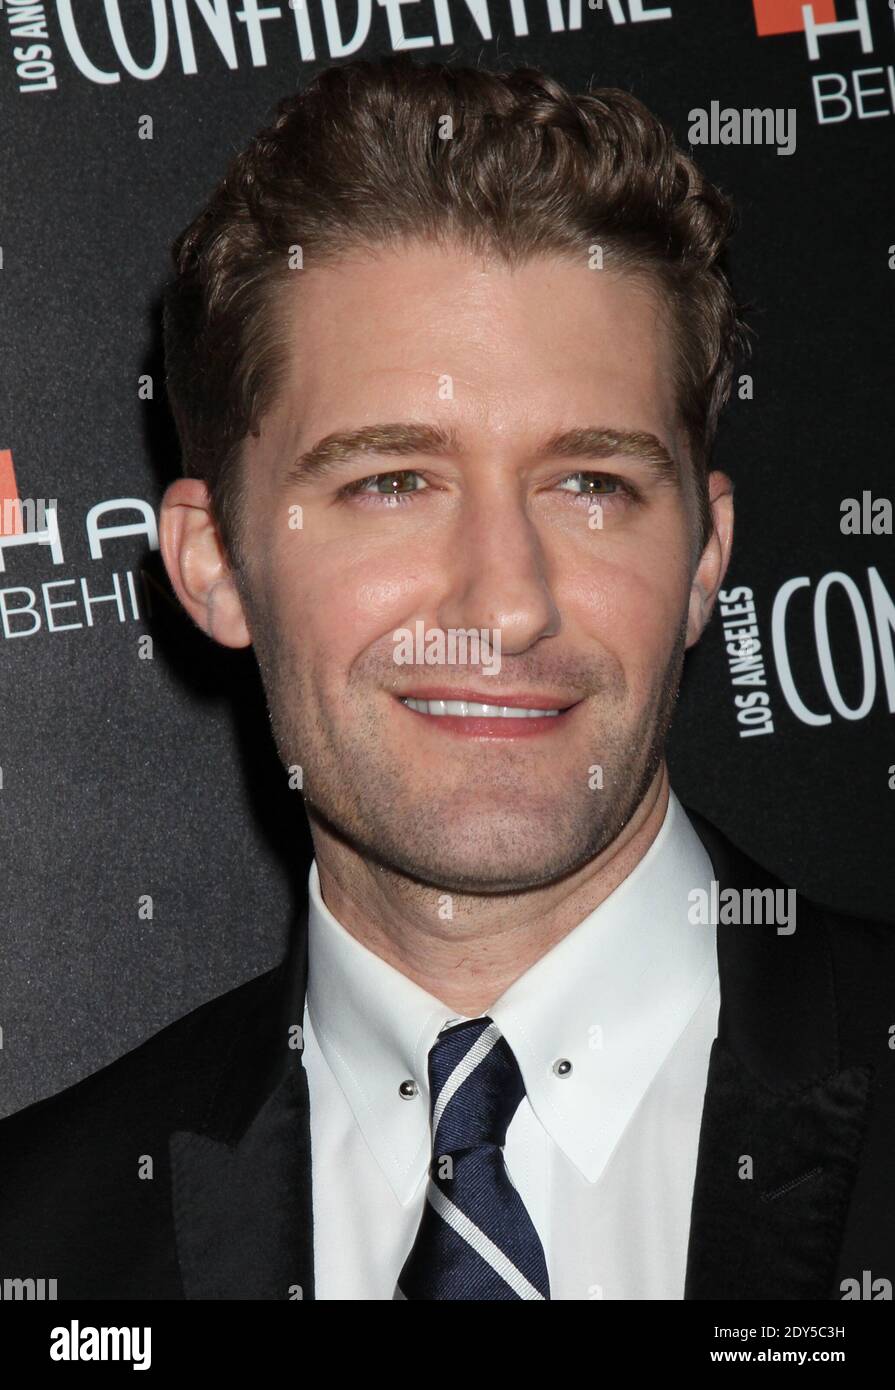 Matthew Morrison attending The Hamilton Behind the Camera Awards at The Wilshire Ebell Theatre in Los Angeles, CA, USA on November 9, 2014. Photo by Baxter/ABACAPRESS.COM Stock Photo